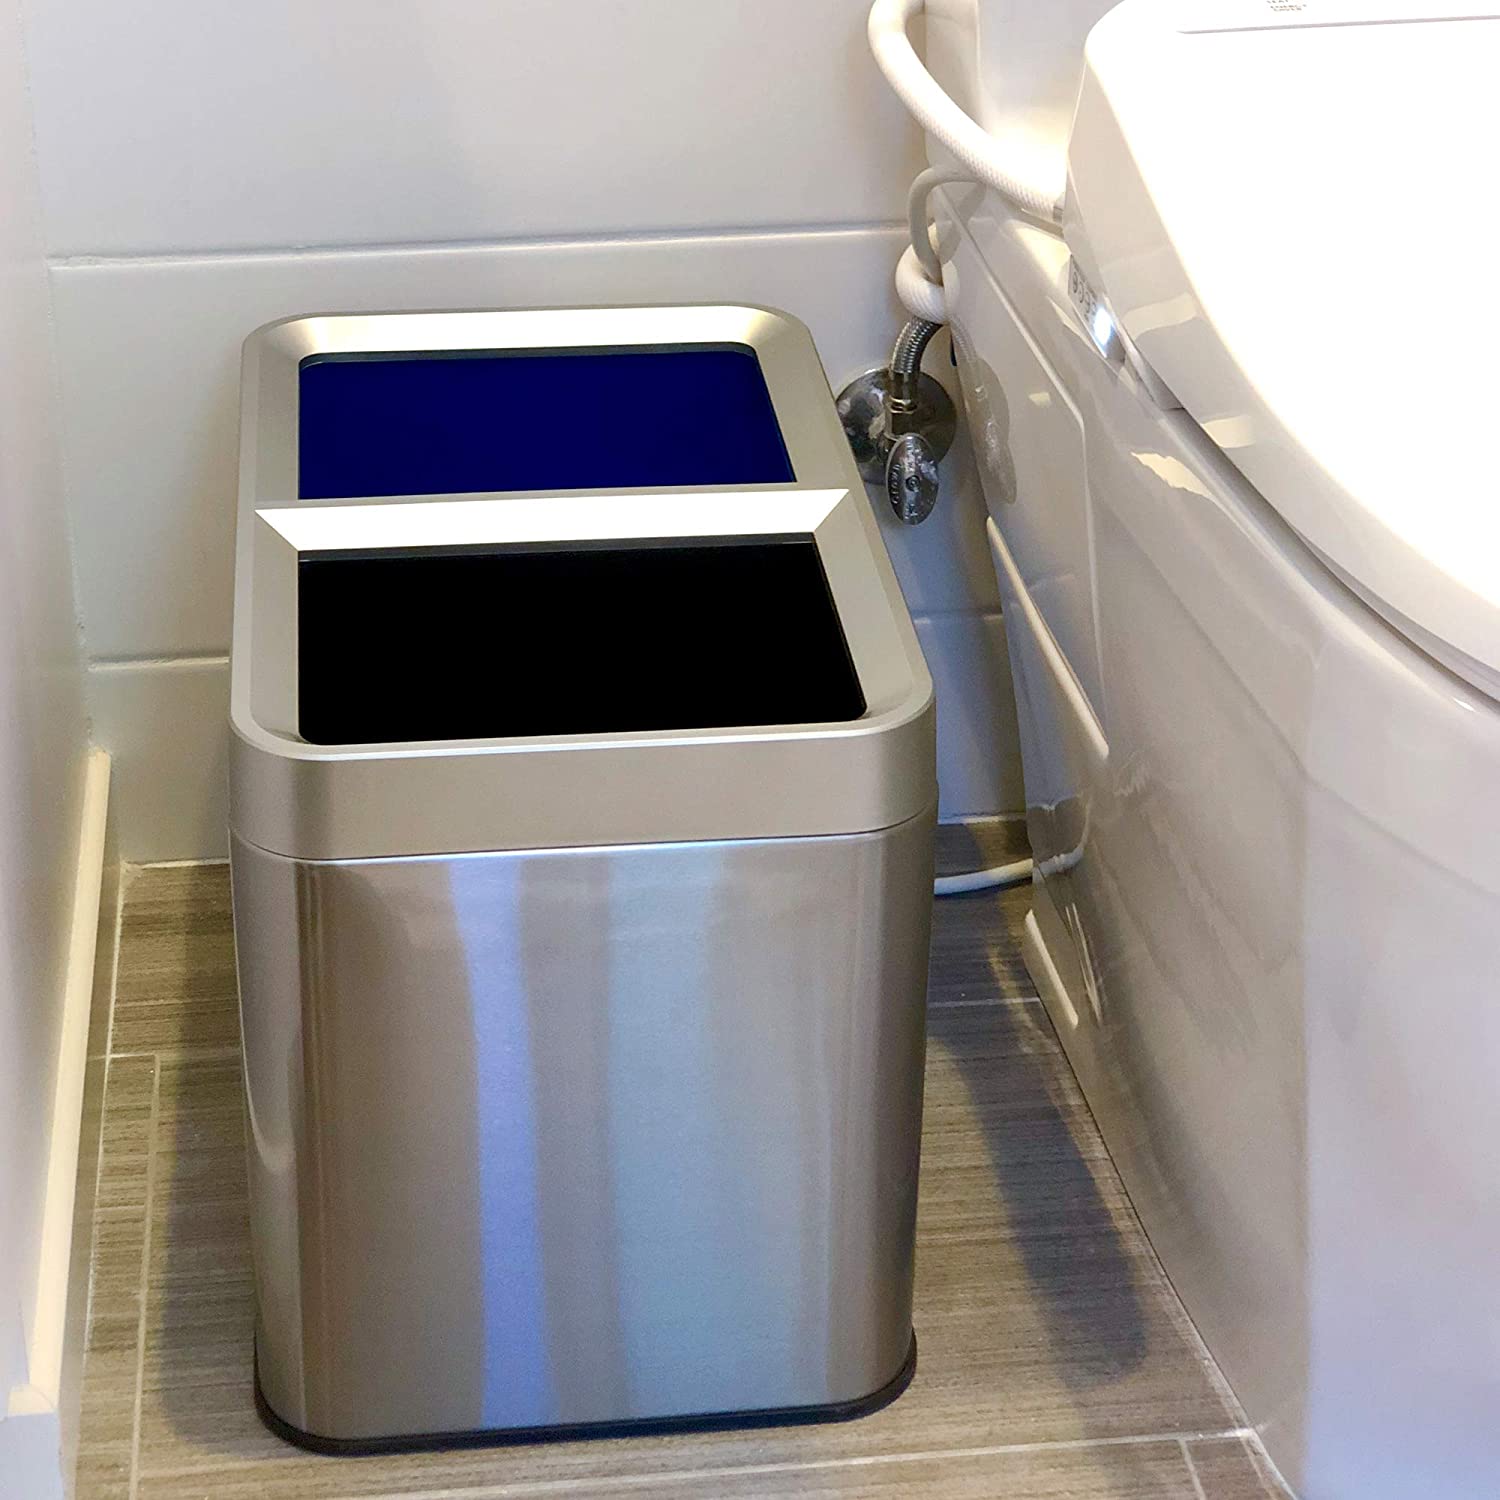 Dual Compartment Slim Open Top Waste Bin for Trash Can & Recycle Container, 20 Liter  5.3 Gallon